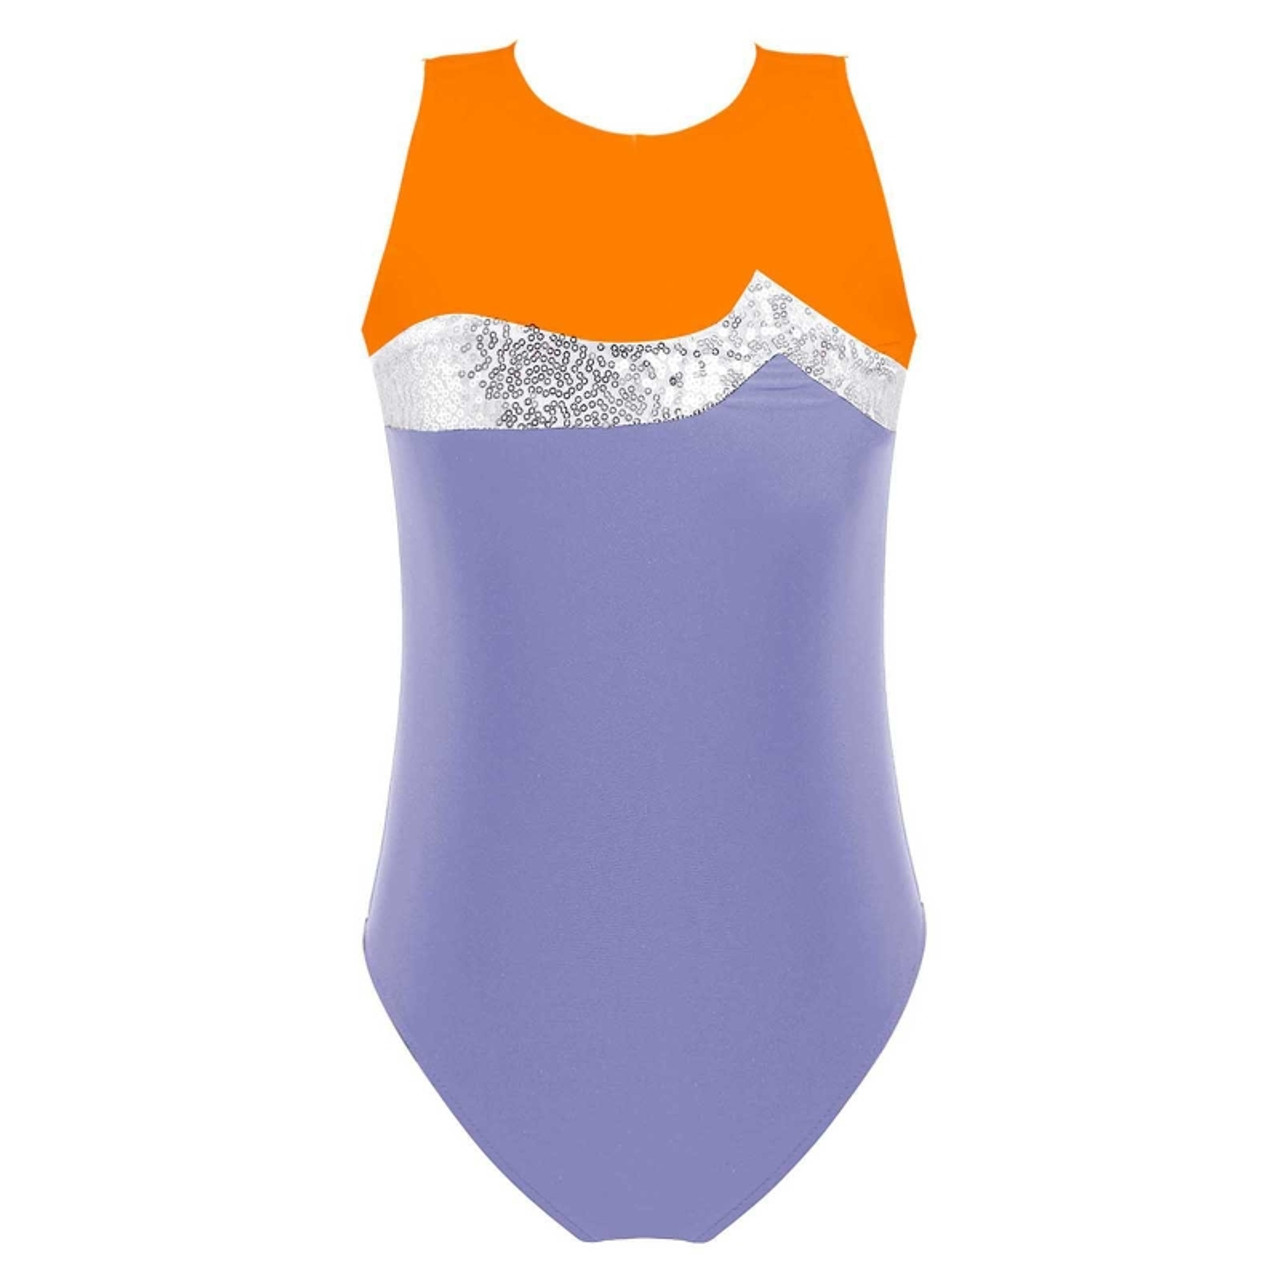 Sleeveless Yellow Ballet Leotard  Buy a Light Yellow Toddler Leotard for  Dance & Tumble Classes – Leotard Boutique